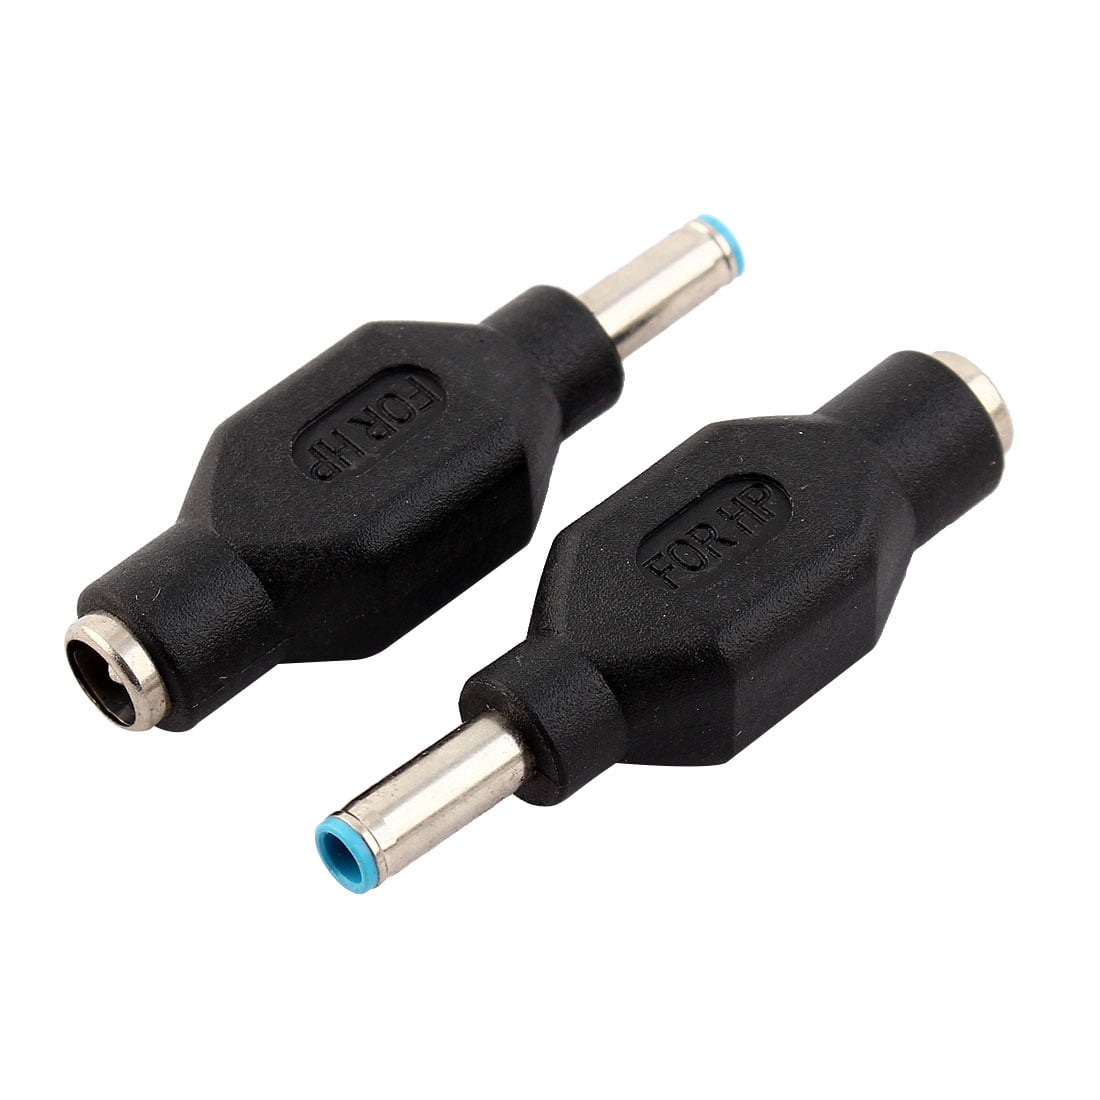 2pcs DC Power 5.5x2.1mm Male Plug to 5.5x2.5mm Female Jack Adapter Connector 